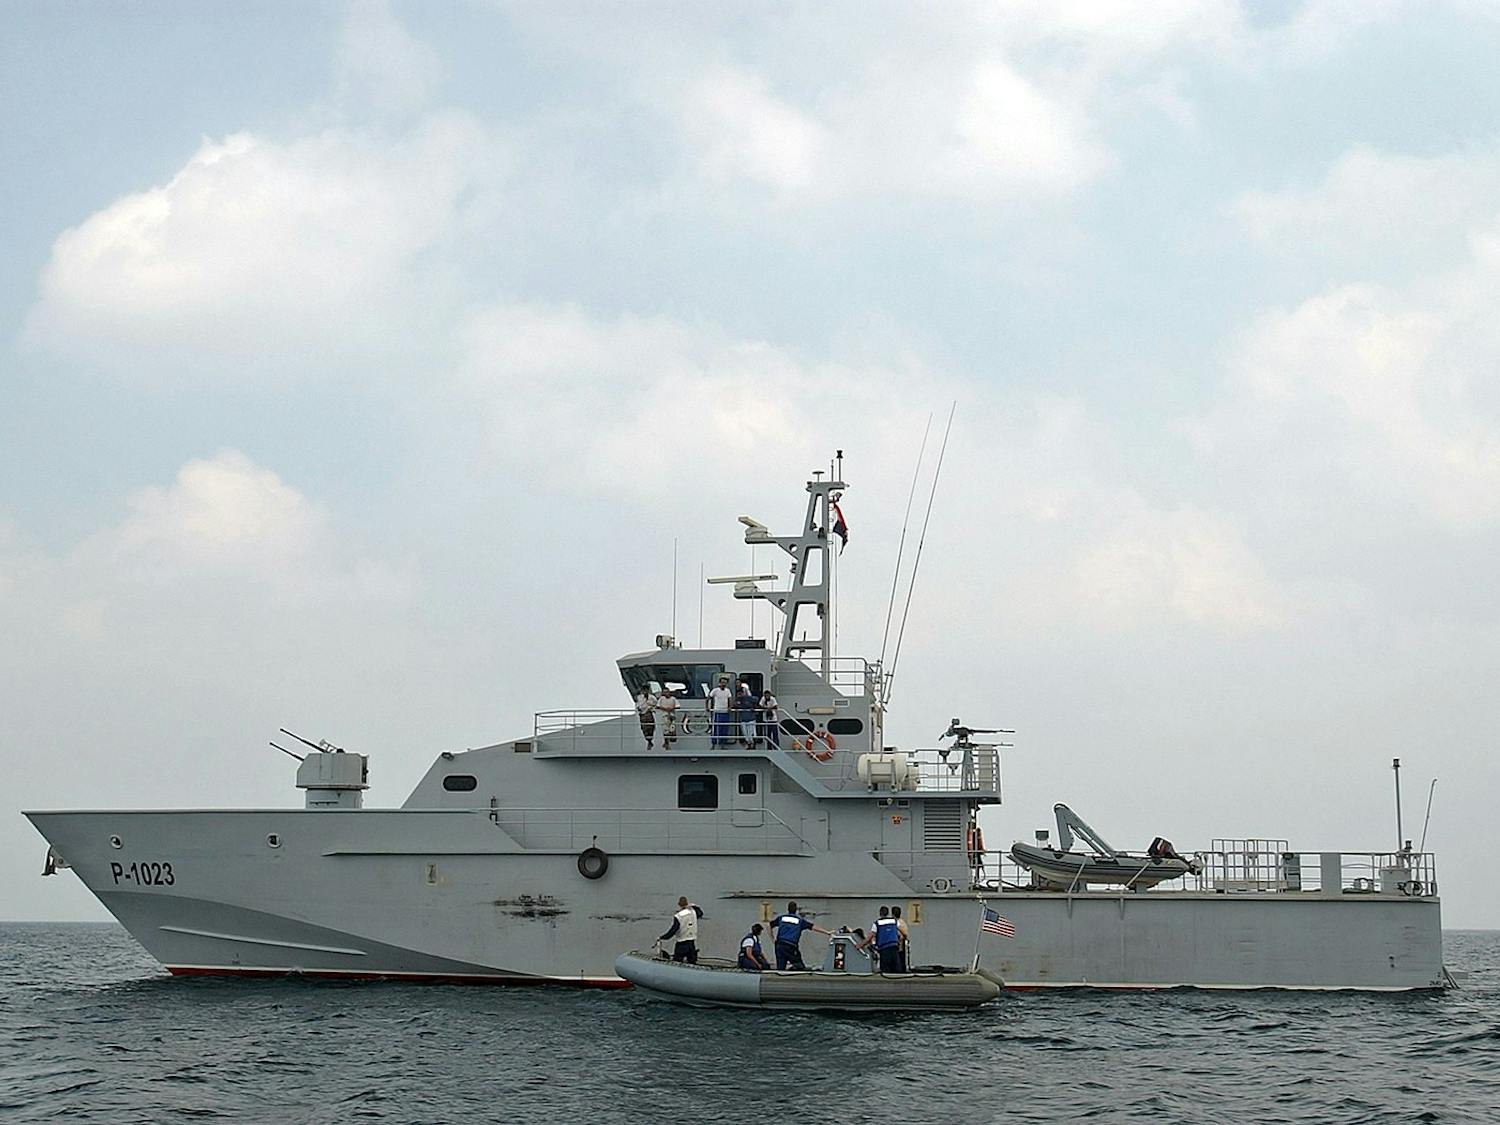 The beginning of the war in Gaza brought an end to headway in peace talks, as the Houthis vowed to attack any ships in the Red Sea they believed to have ties to Israel (Photo courtesy of Wikimedia Commons / “U.S. Navy Photo By Mass Communication Specialist 3rd Class Vincent J. Street”/ Public Domain / October 2, 2007). 